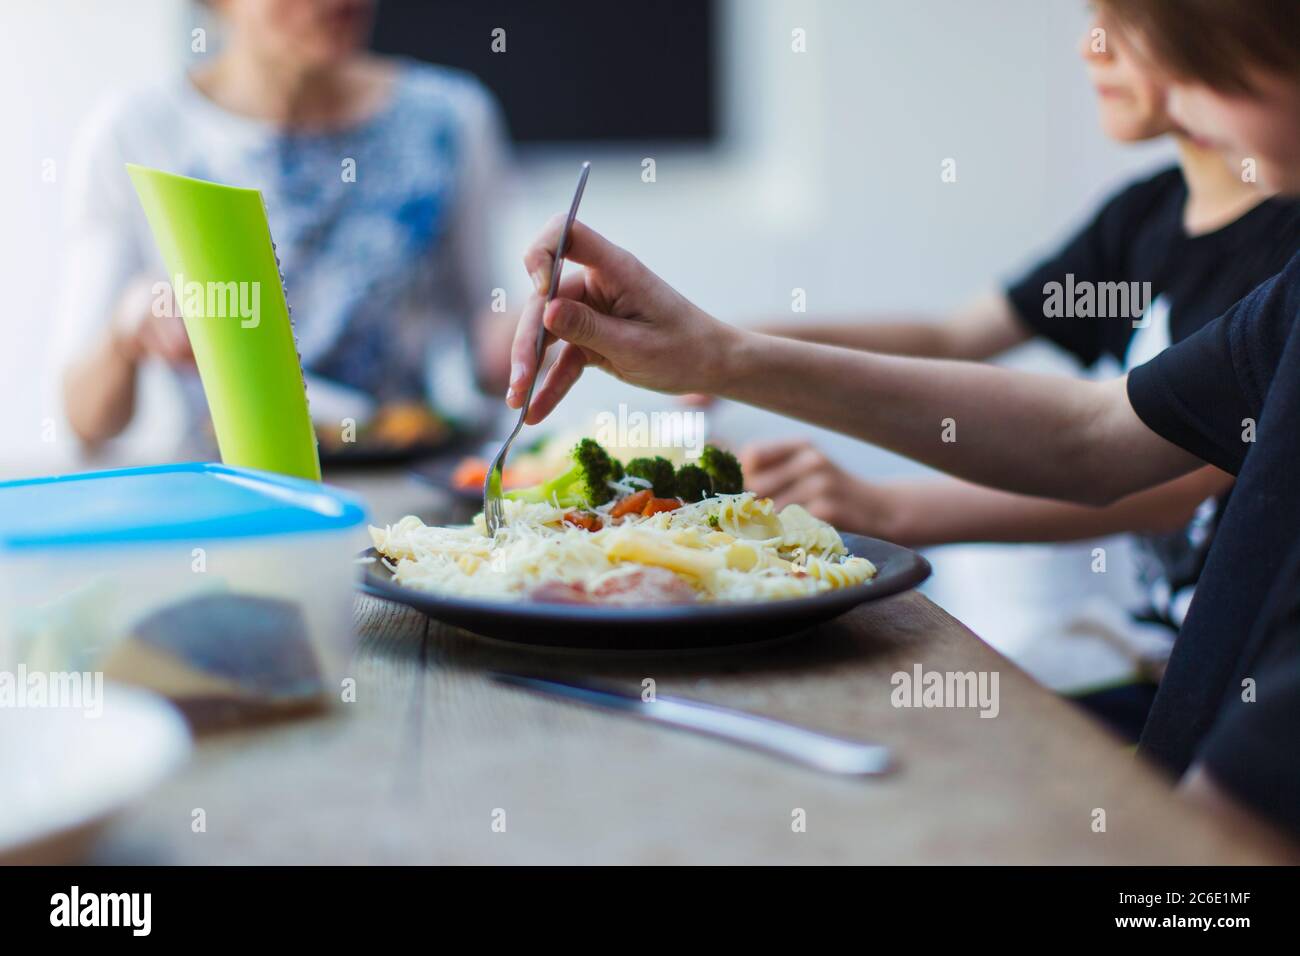 Close up family eating at dining table Stock Photo